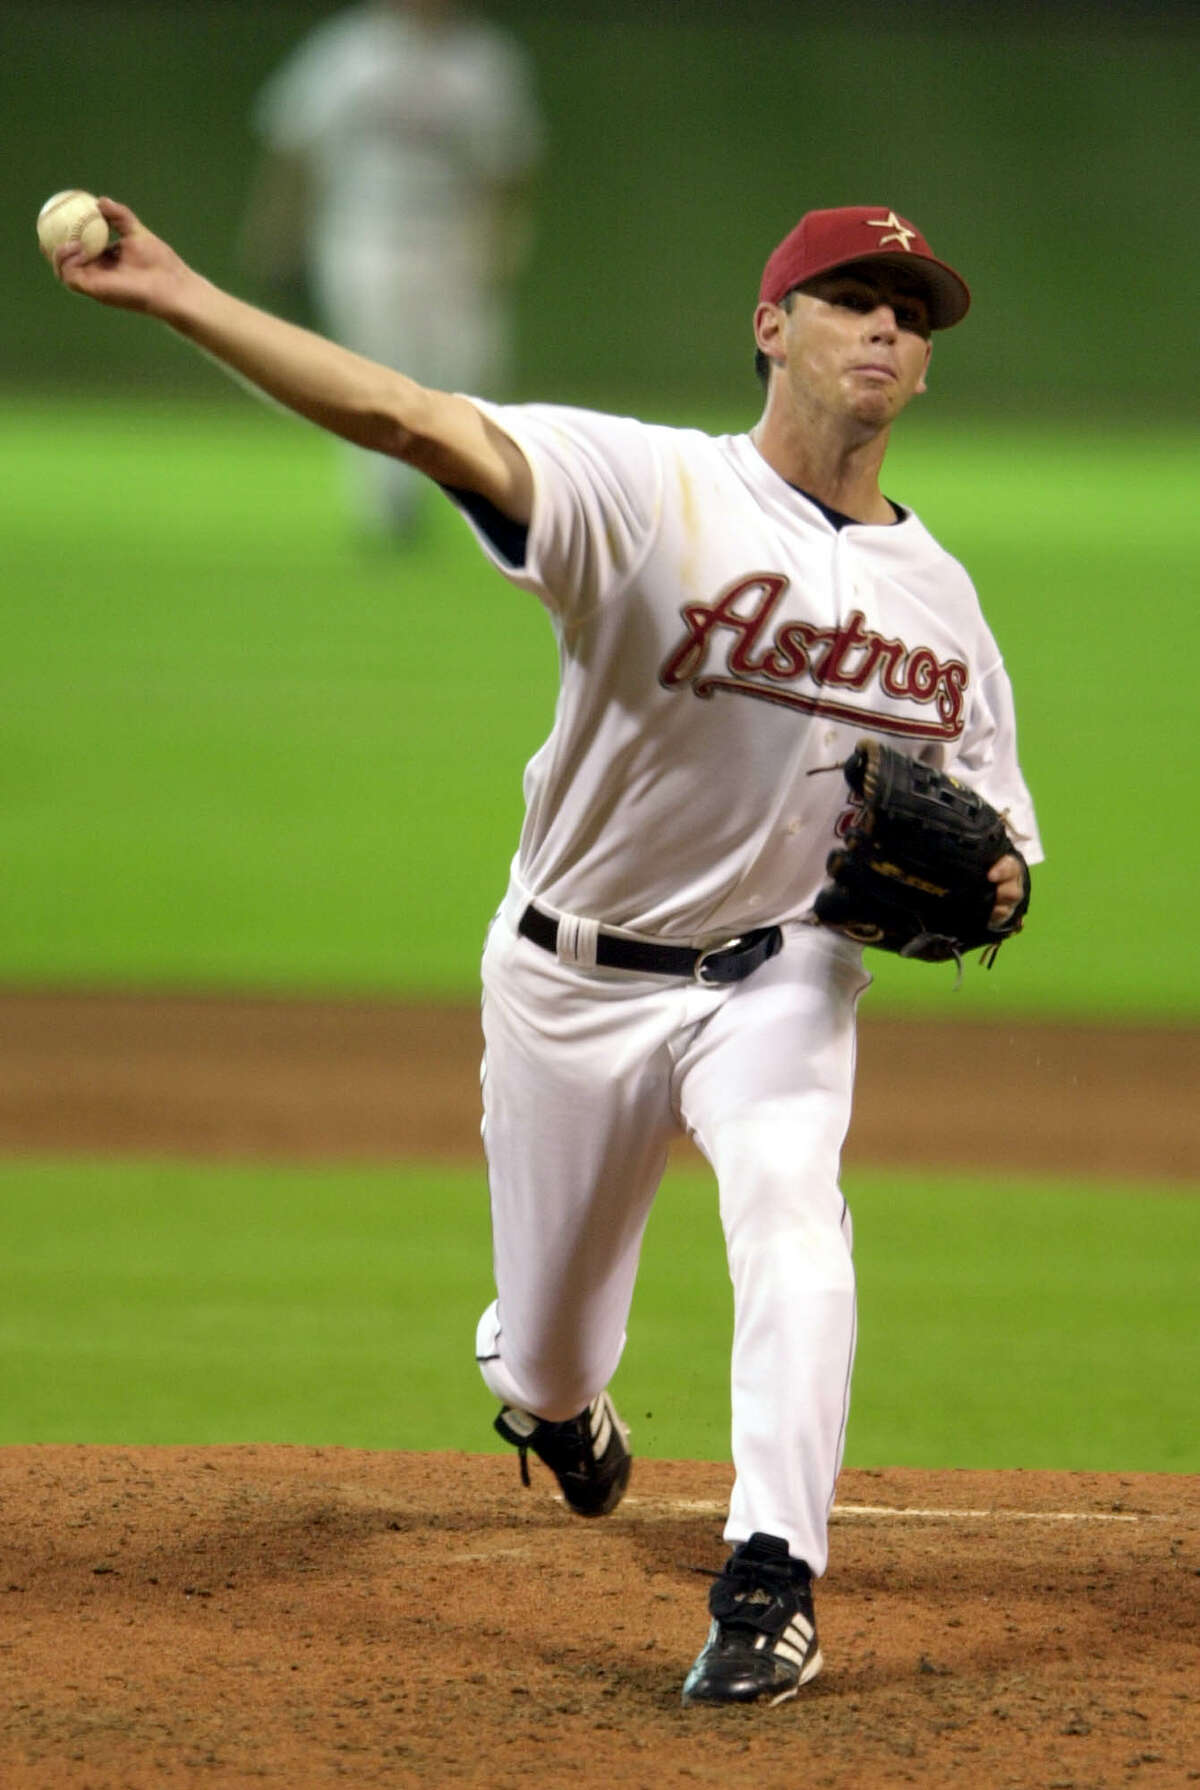 Houston Astros starting pitcher Kirk Saarloos delivers a pitch in the sixth inning against the Pittsburgh Pirates on Thursday, July 25, 2002, in Houston. Saarloos pitched his first major-league complete game and shutout, giving up six hits and striking out six in the Astros' 8-0 win.